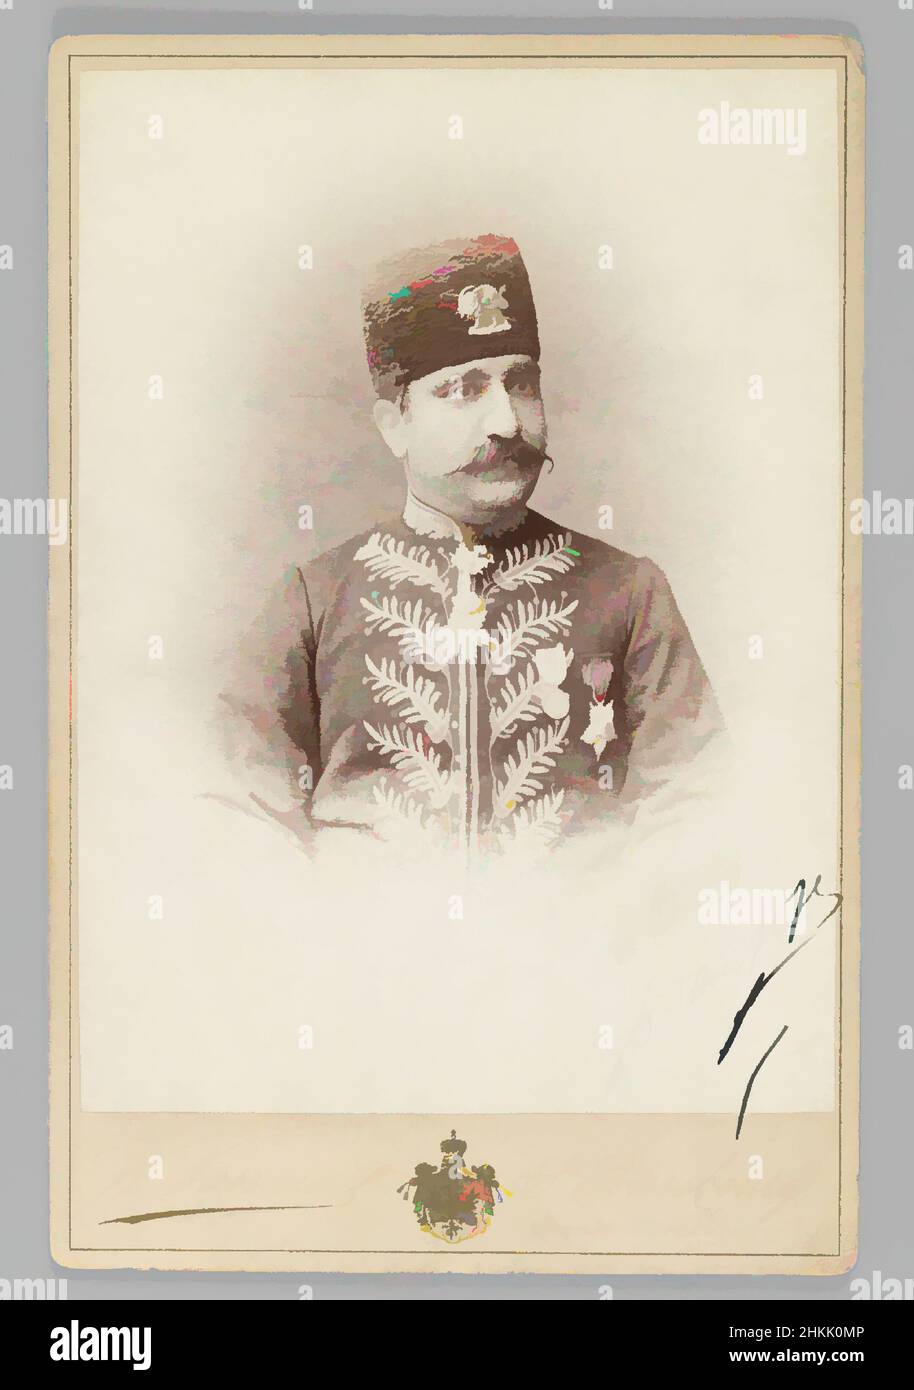 Art inspired by One of 274 Vintage Photographs, Gelatin silver printing out paper, 1875, Qajar, Qajar Period, Photo: 5 1/2 x 4 in., 13.9 x 10.1 cm;, cartes de visite, military, moustache, photograph, photography, Qajar, Russia, St. Petersburg, Classic works modernized by Artotop with a splash of modernity. Shapes, color and value, eye-catching visual impact on art. Emotions through freedom of artworks in a contemporary way. A timeless message pursuing a wildly creative new direction. Artists turning to the digital medium and creating the Artotop NFT Stock Photo